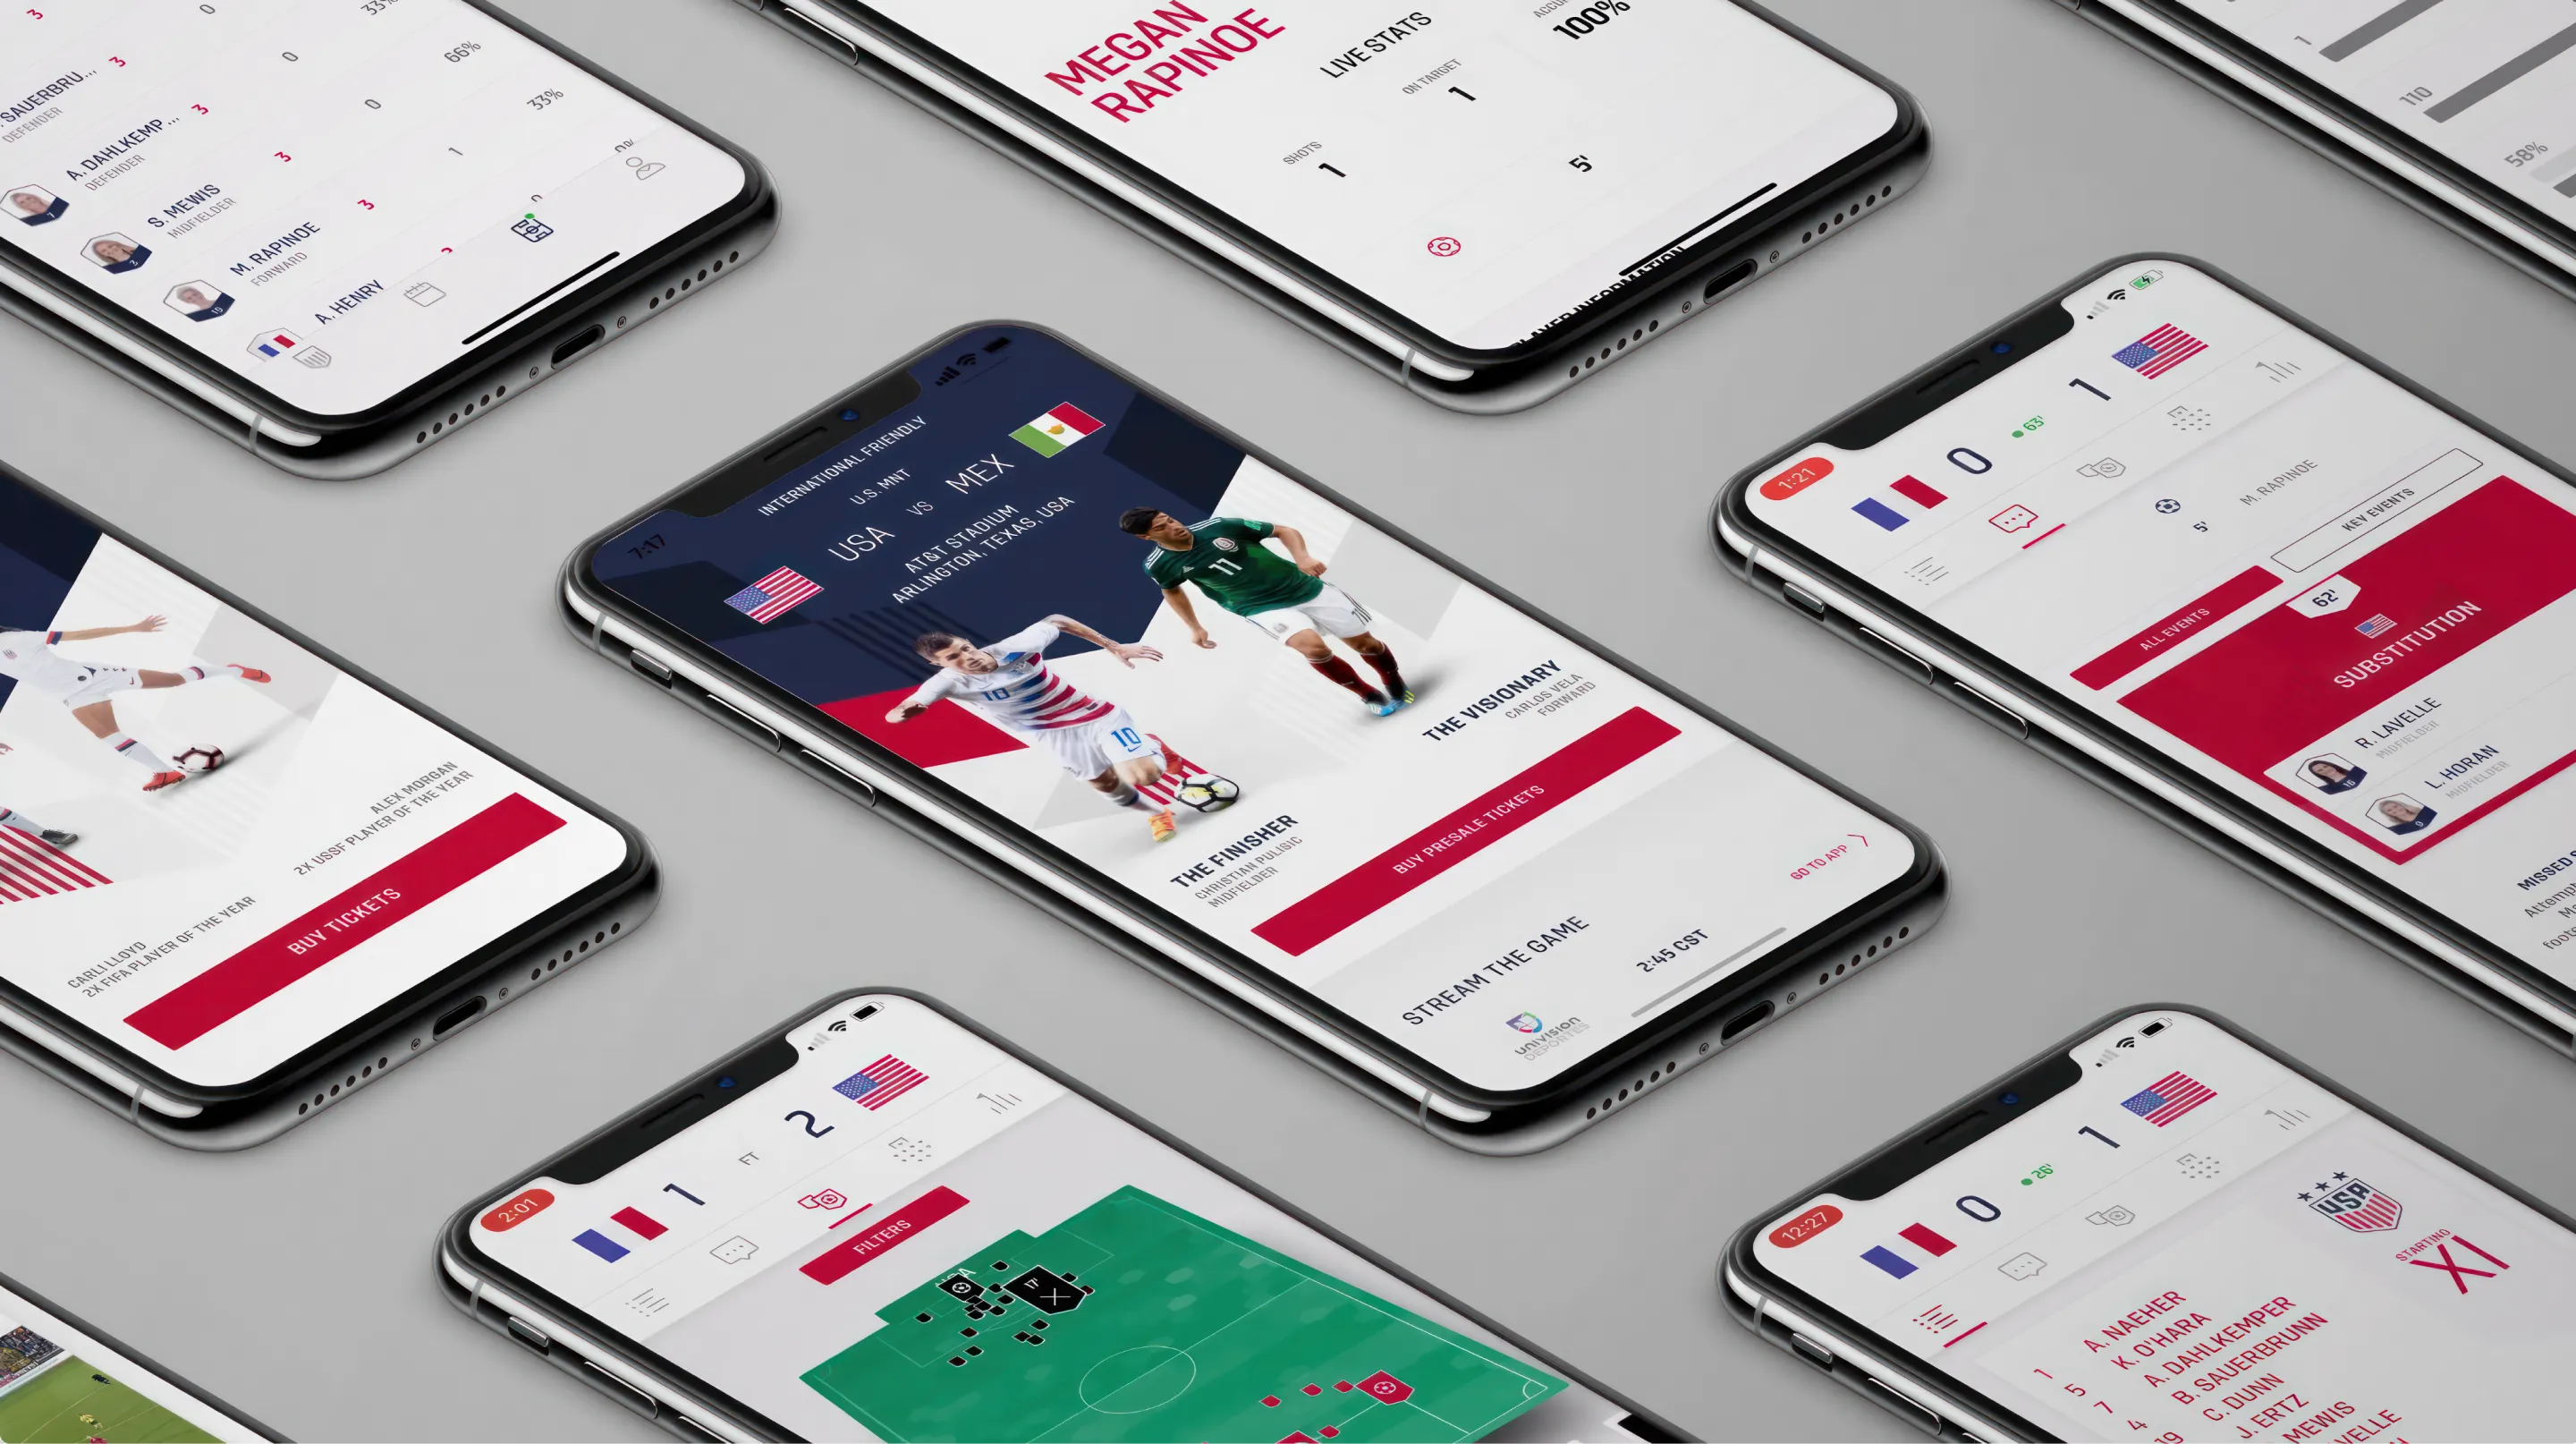 Screenshots of the home screens, player stats, and the live play for the official US Soccer iOS App developed by Everyday Odyssey for AKQA